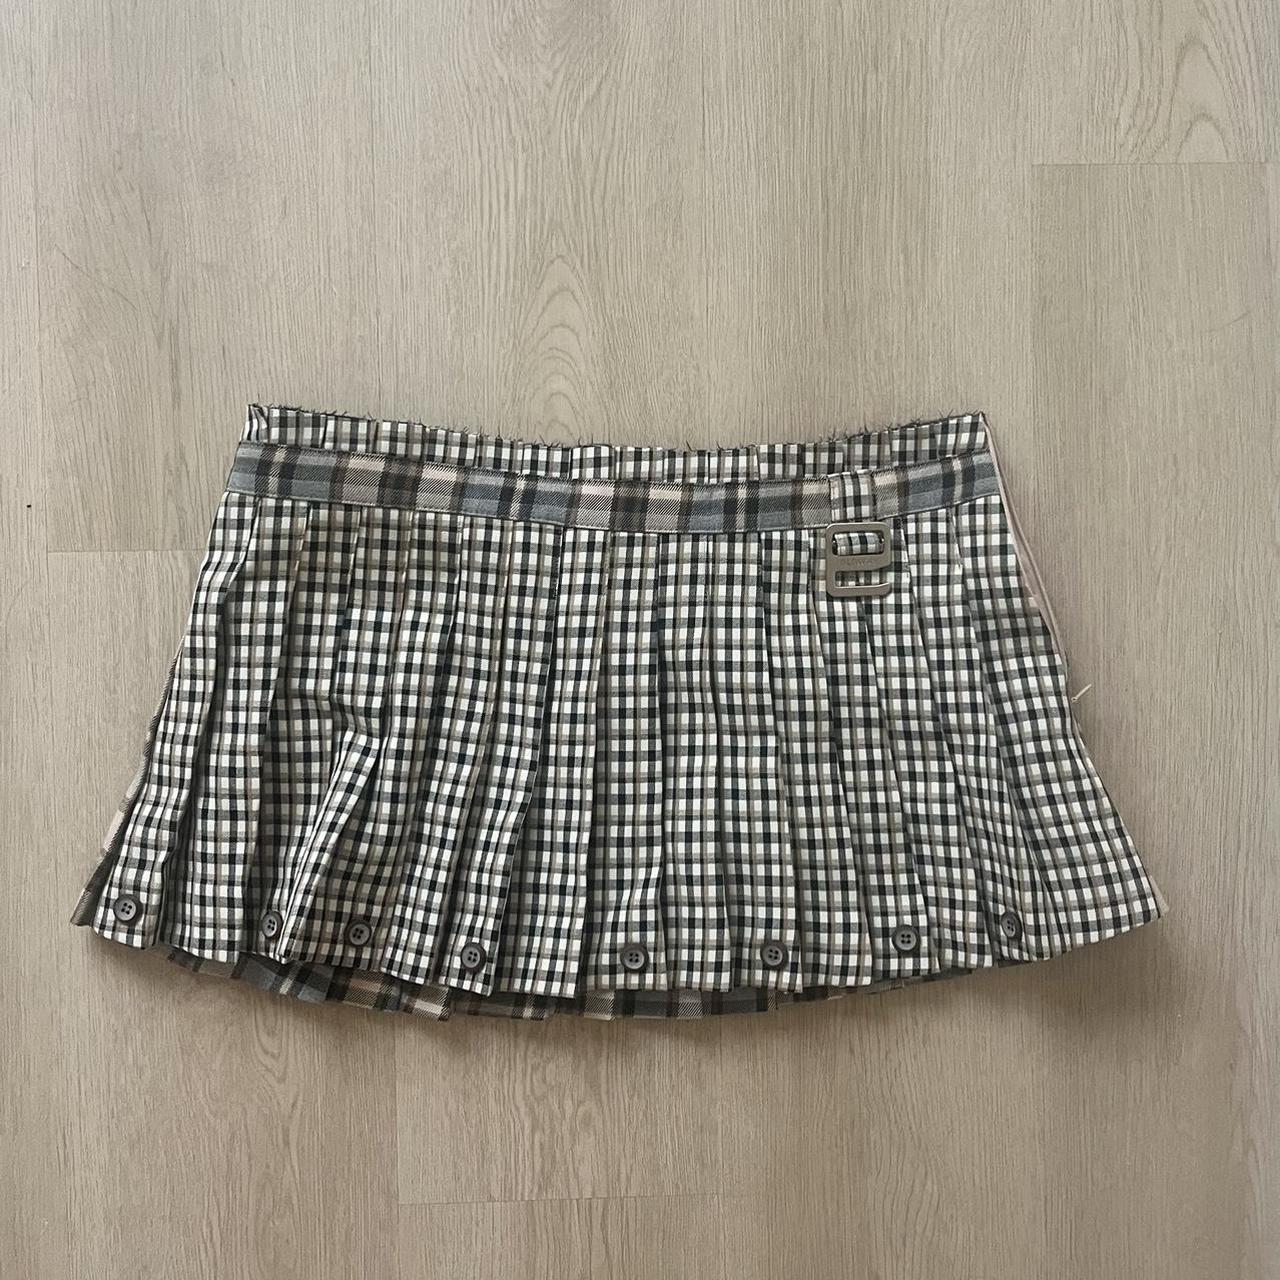 glowny FW 23 Russell plaid mini skirt in brown and...